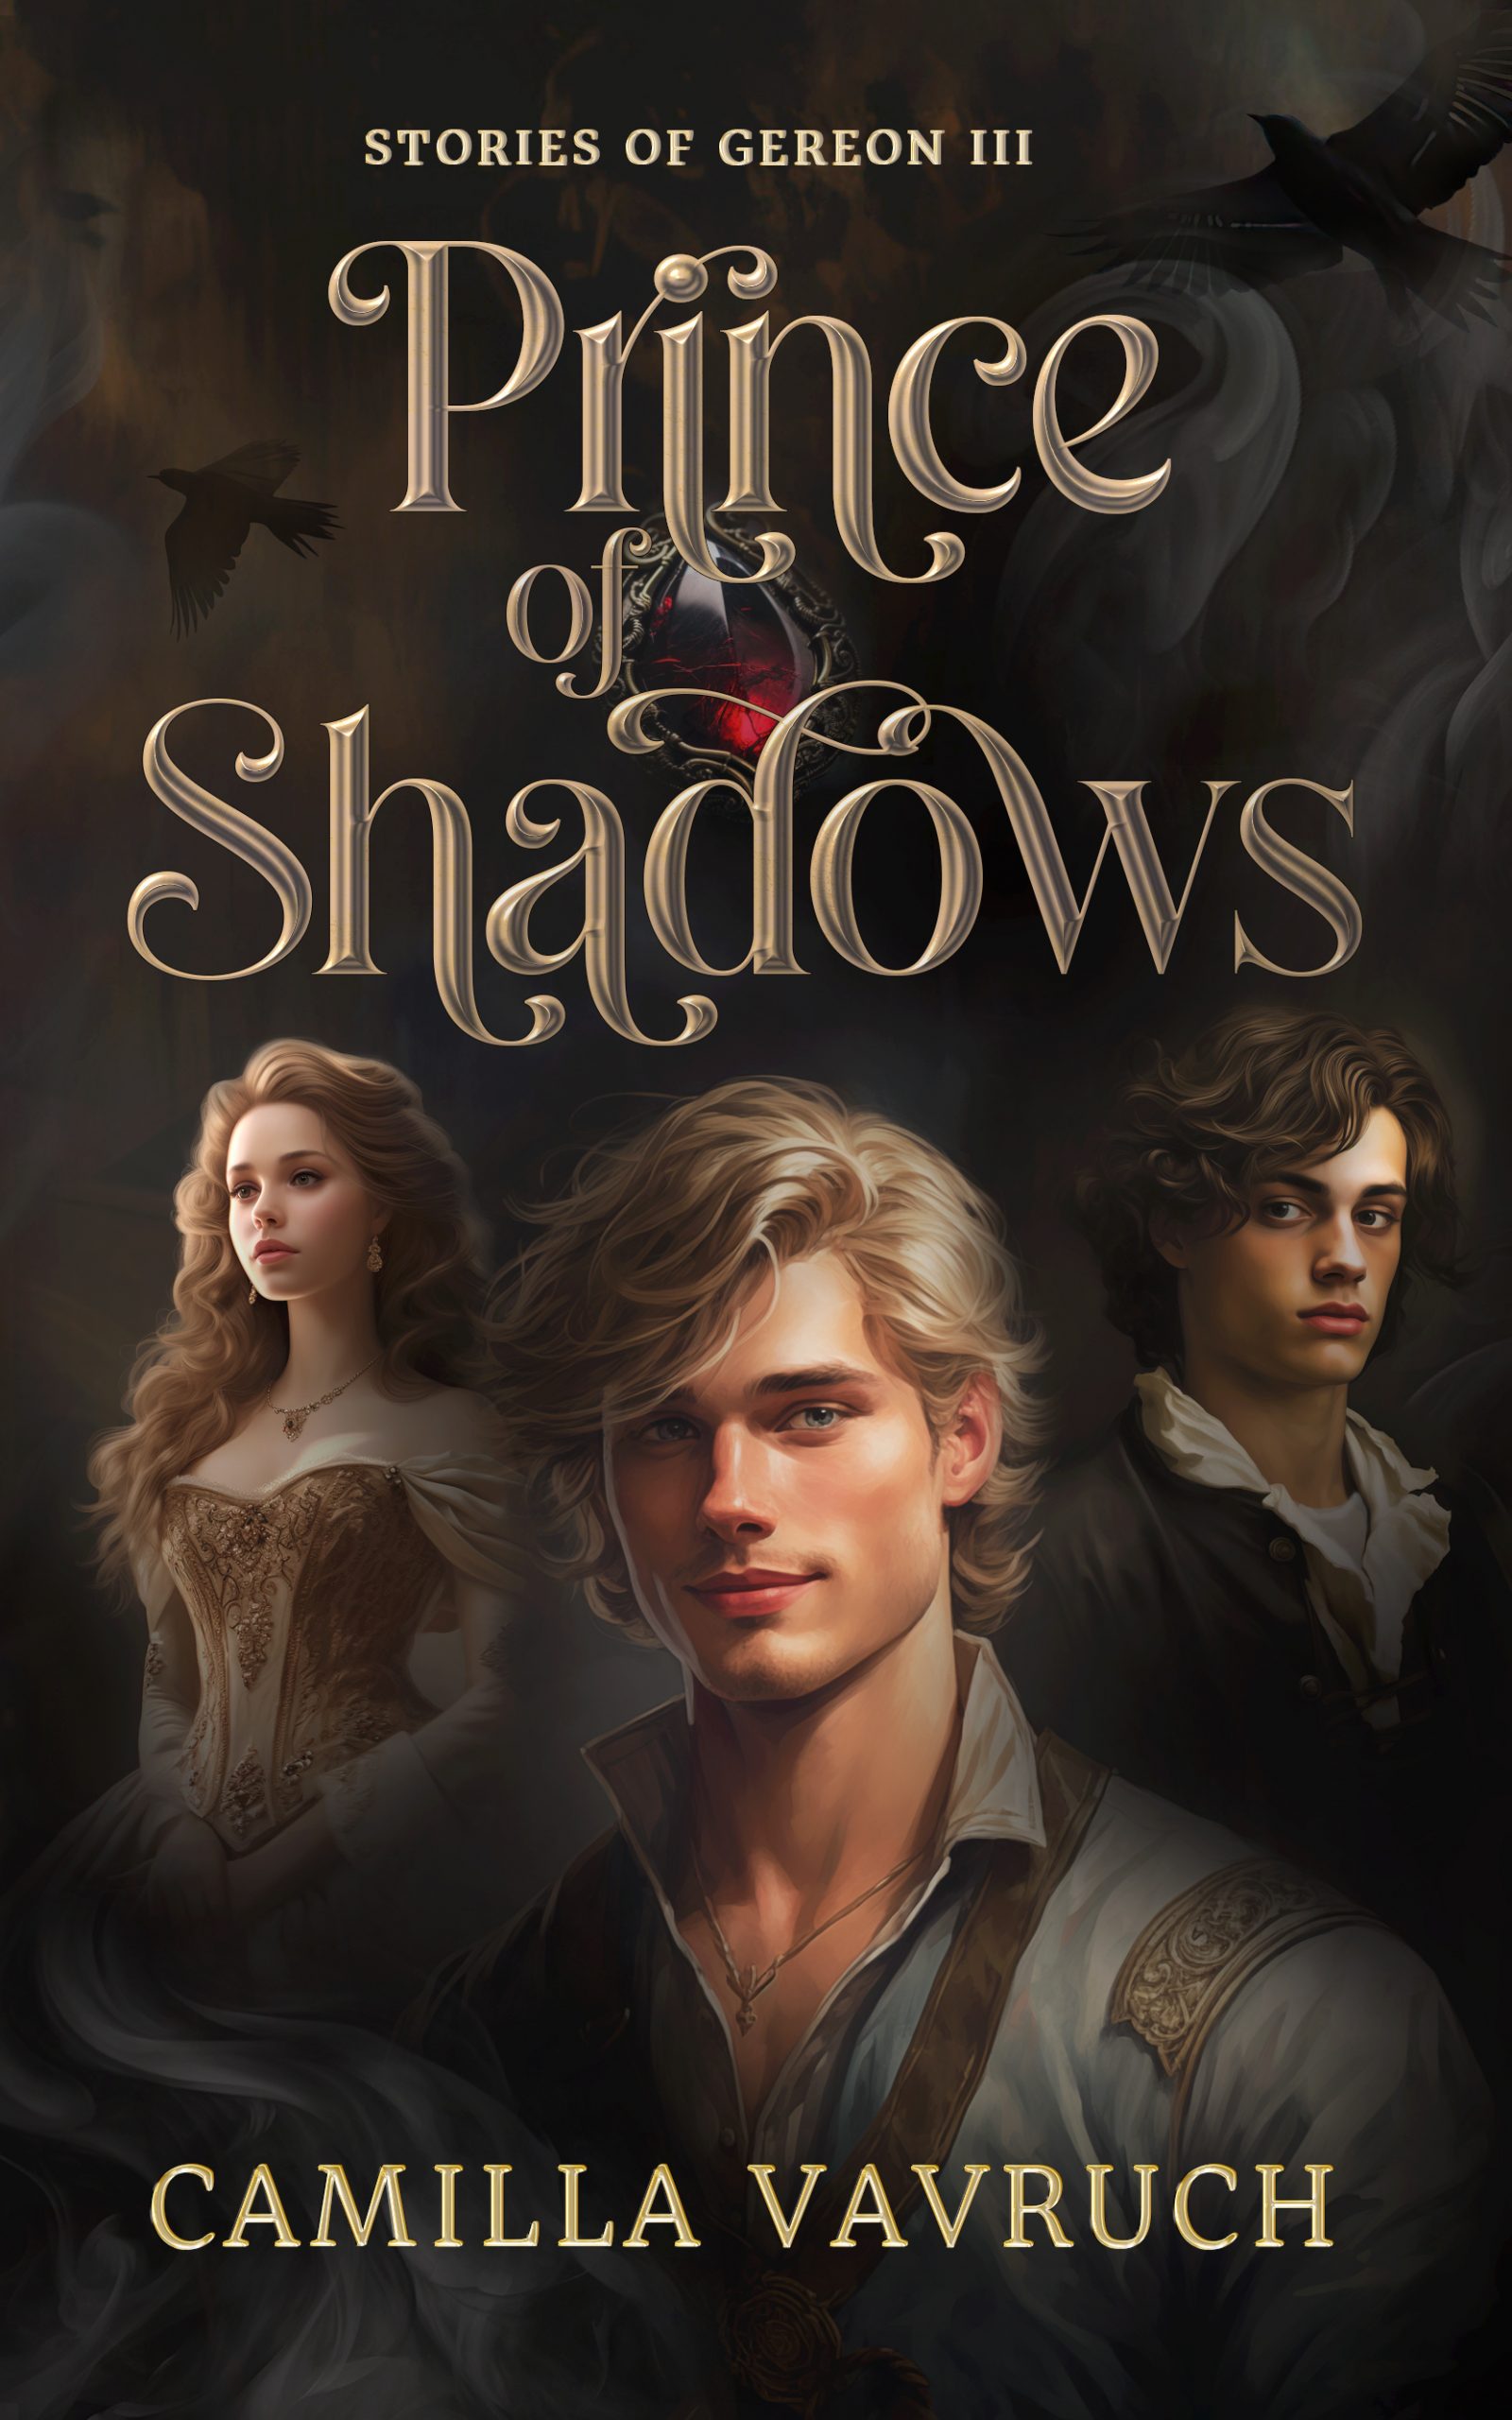 Prince of Shadows by Camilla Vavruch